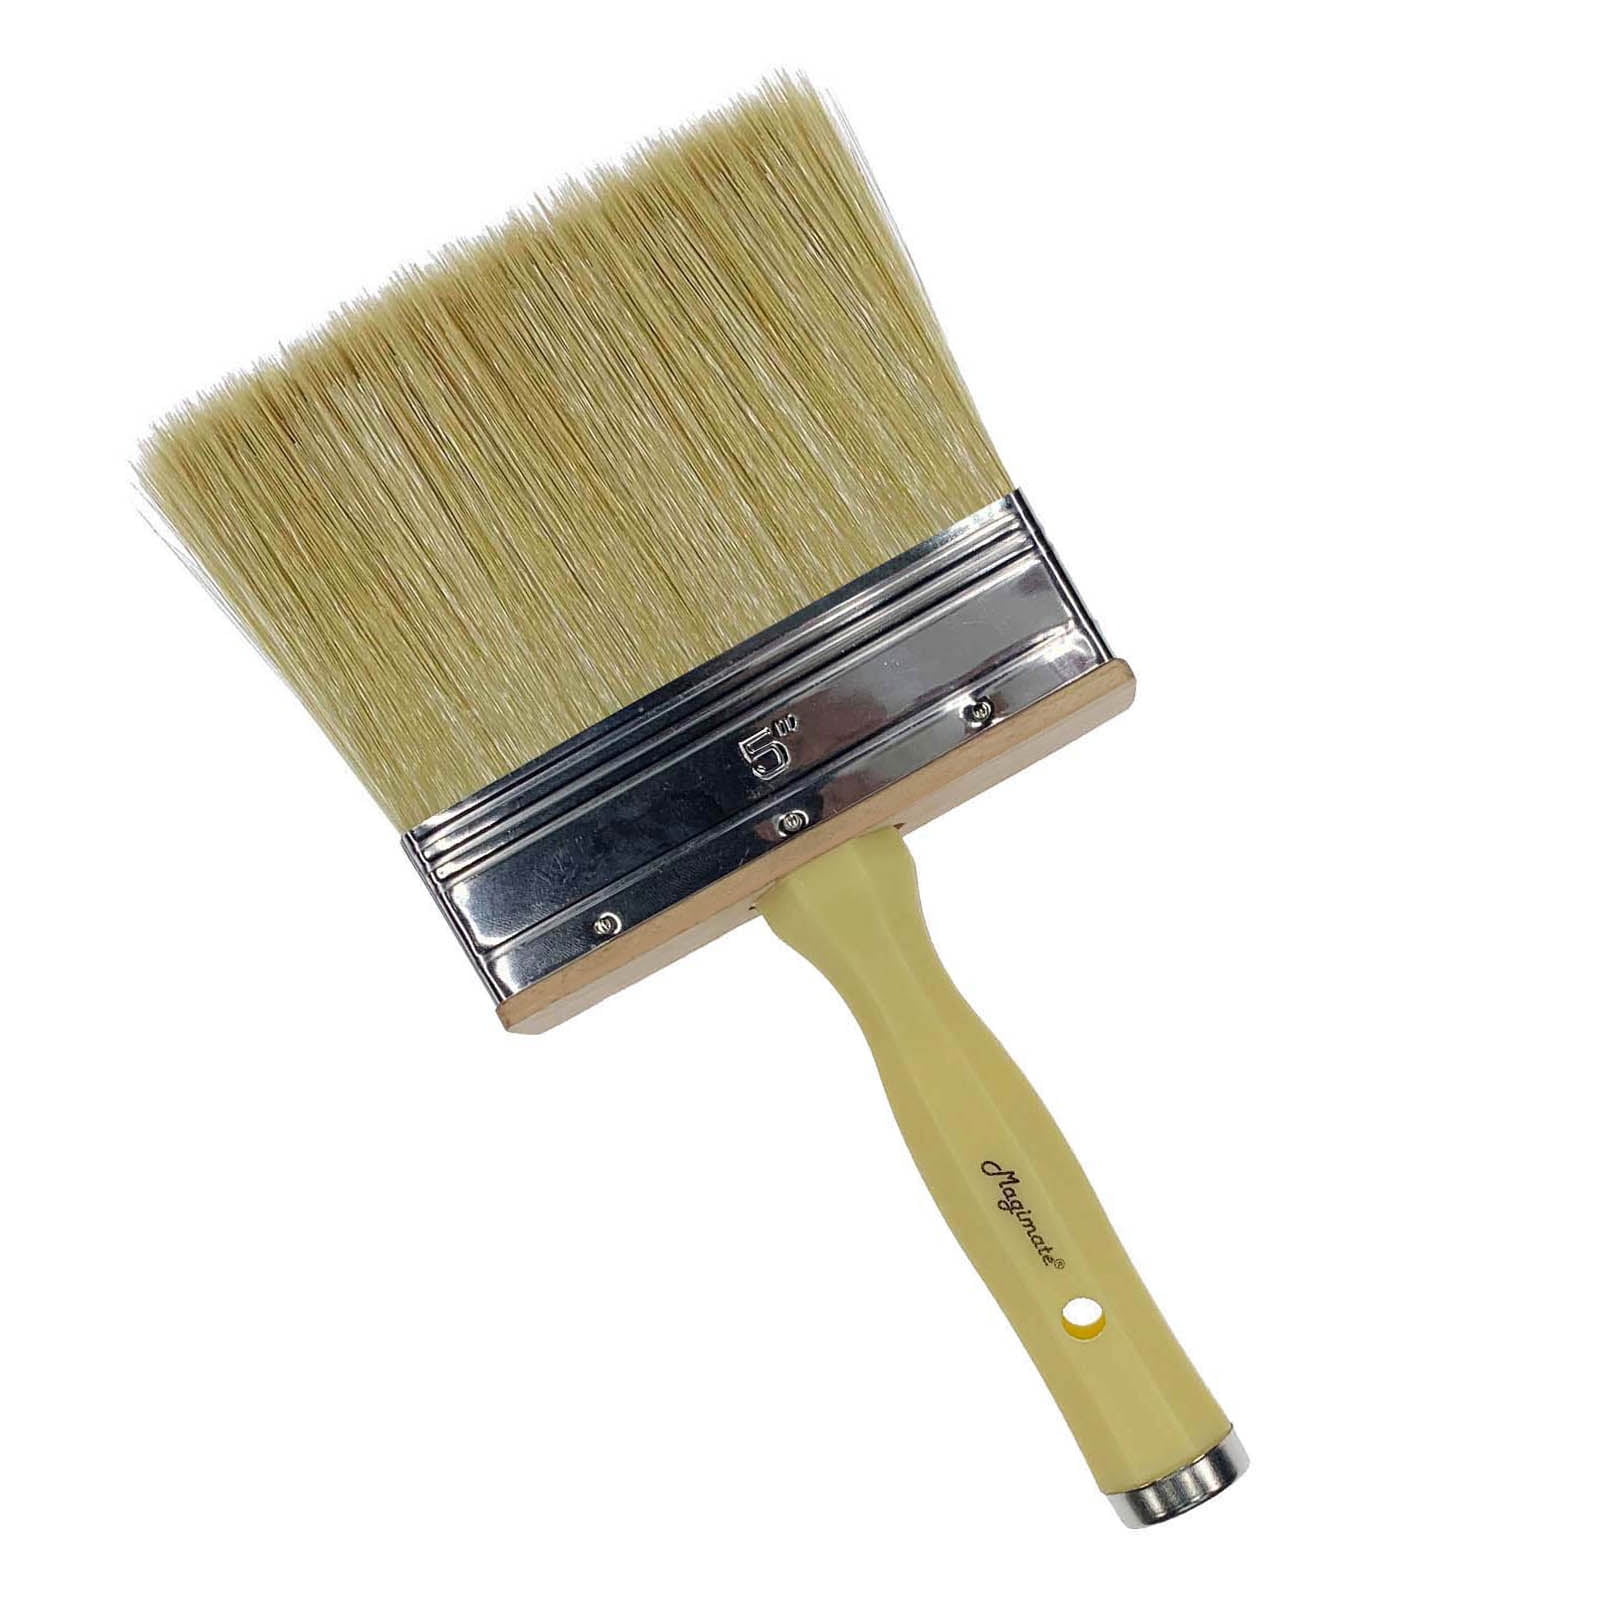 Deck Stain Brush Applicator, Large 7-inch Decking Oil Paint Brushes for  Applying Stains Paints Sealers for Concrete, Brick, Stone, Floor, Fence,  Wood